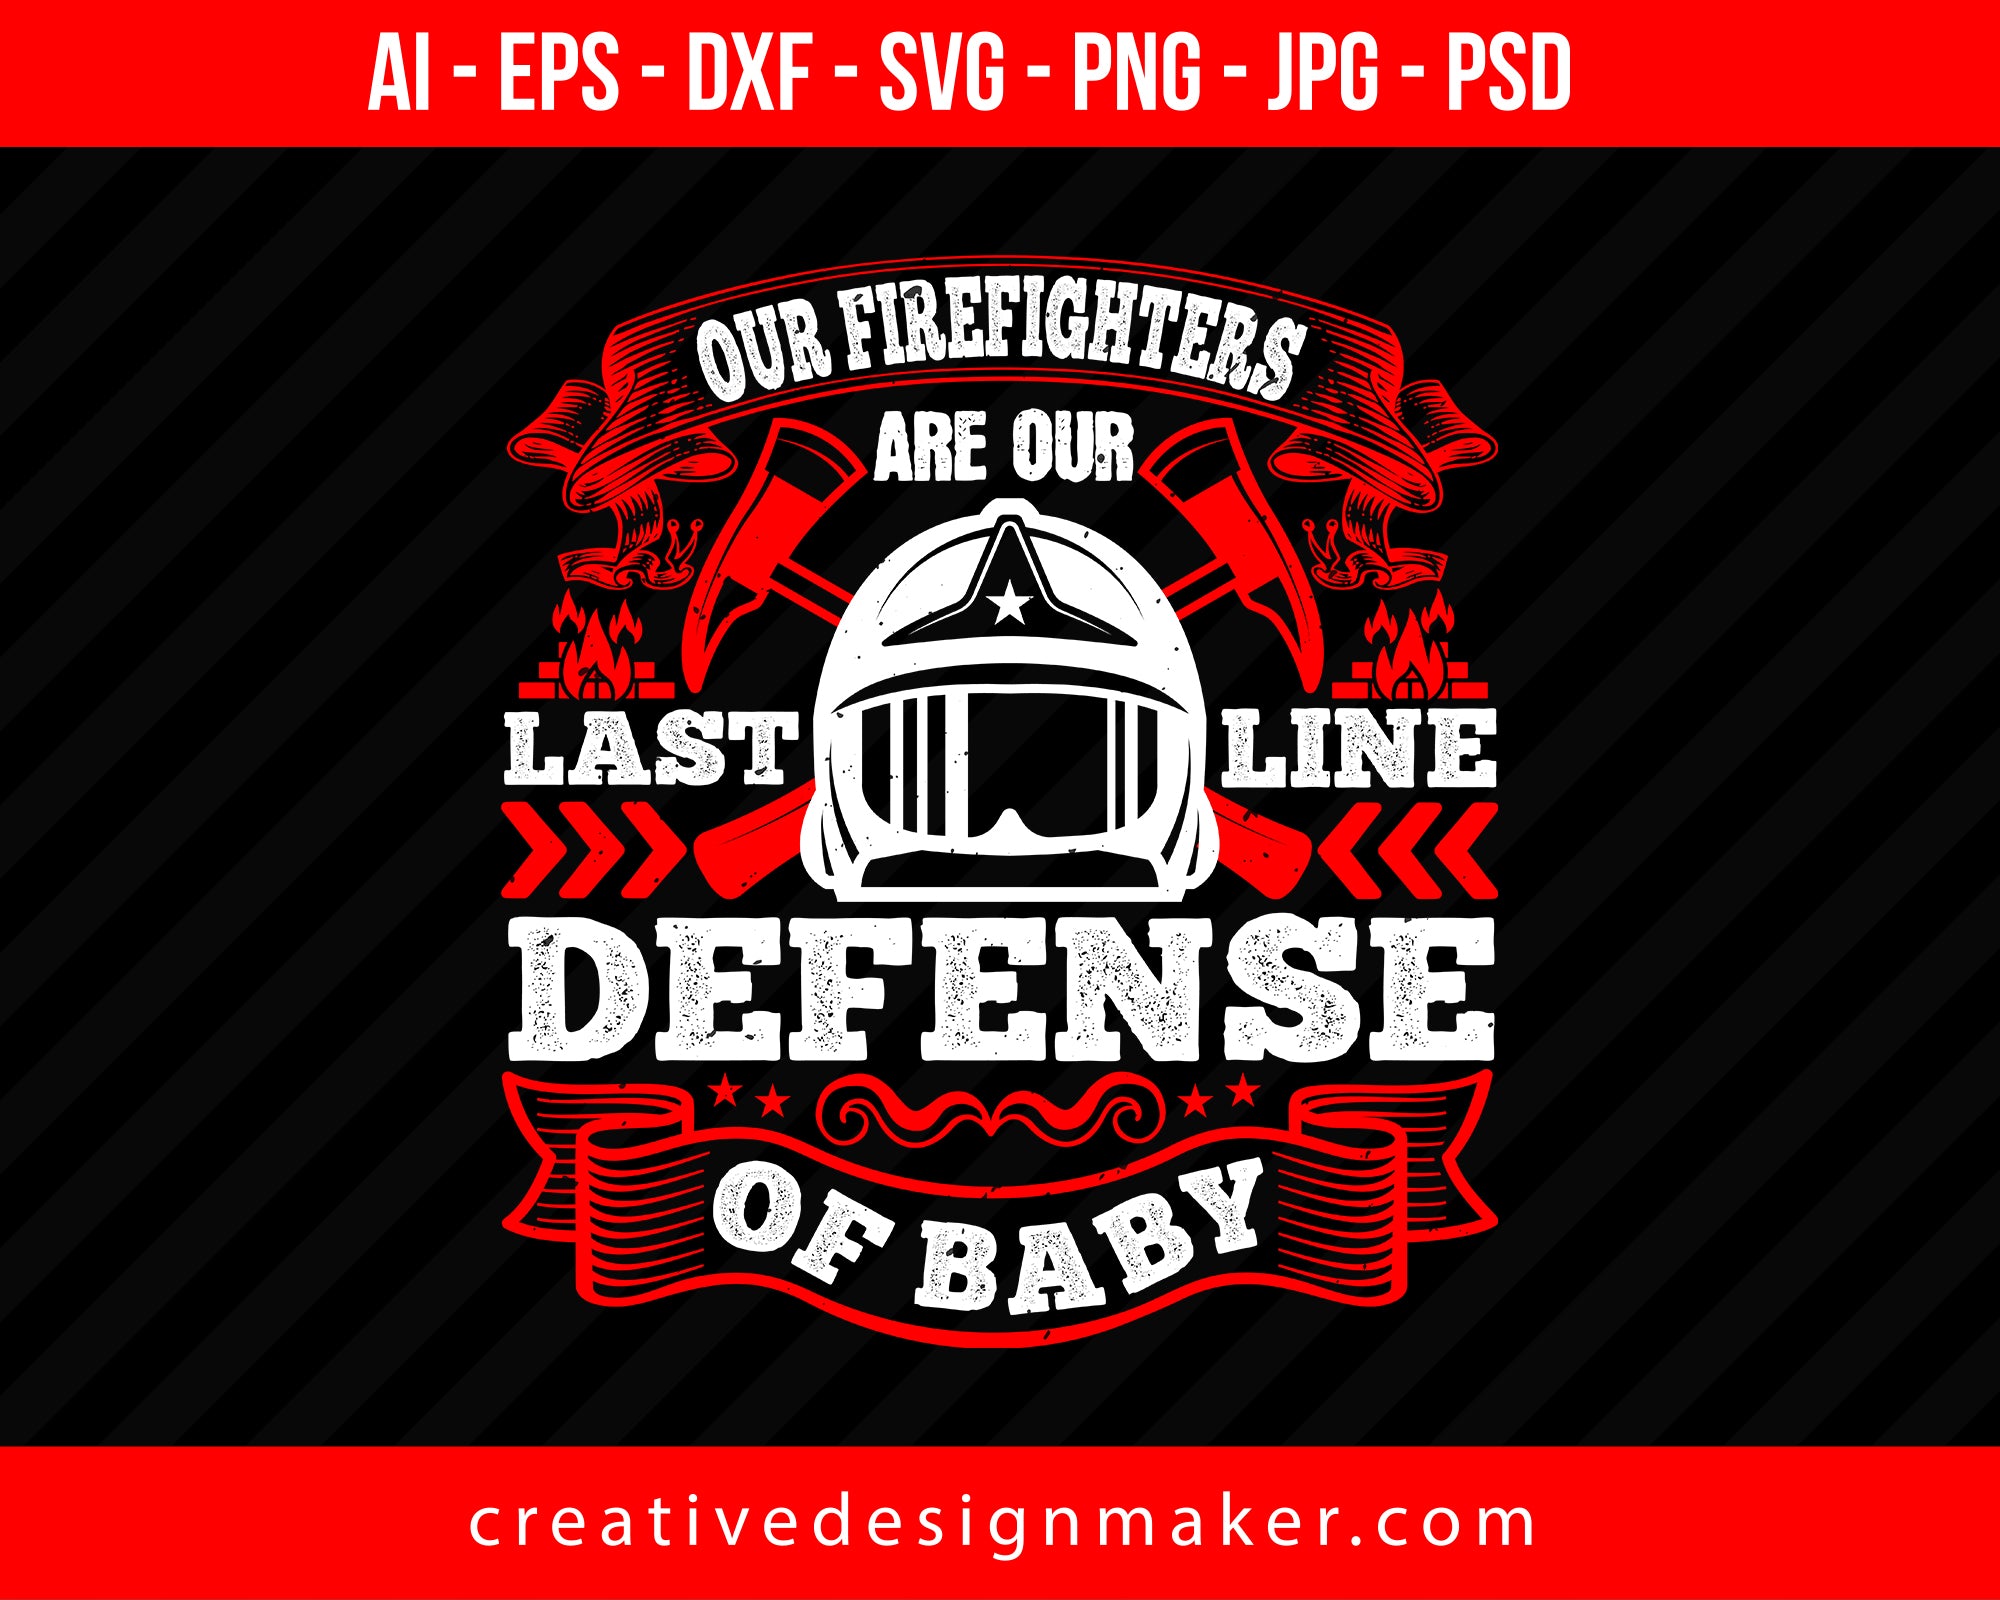 Our firefighters are our last line of defense, baby  Print Ready Editable T-Shirt SVG Design!